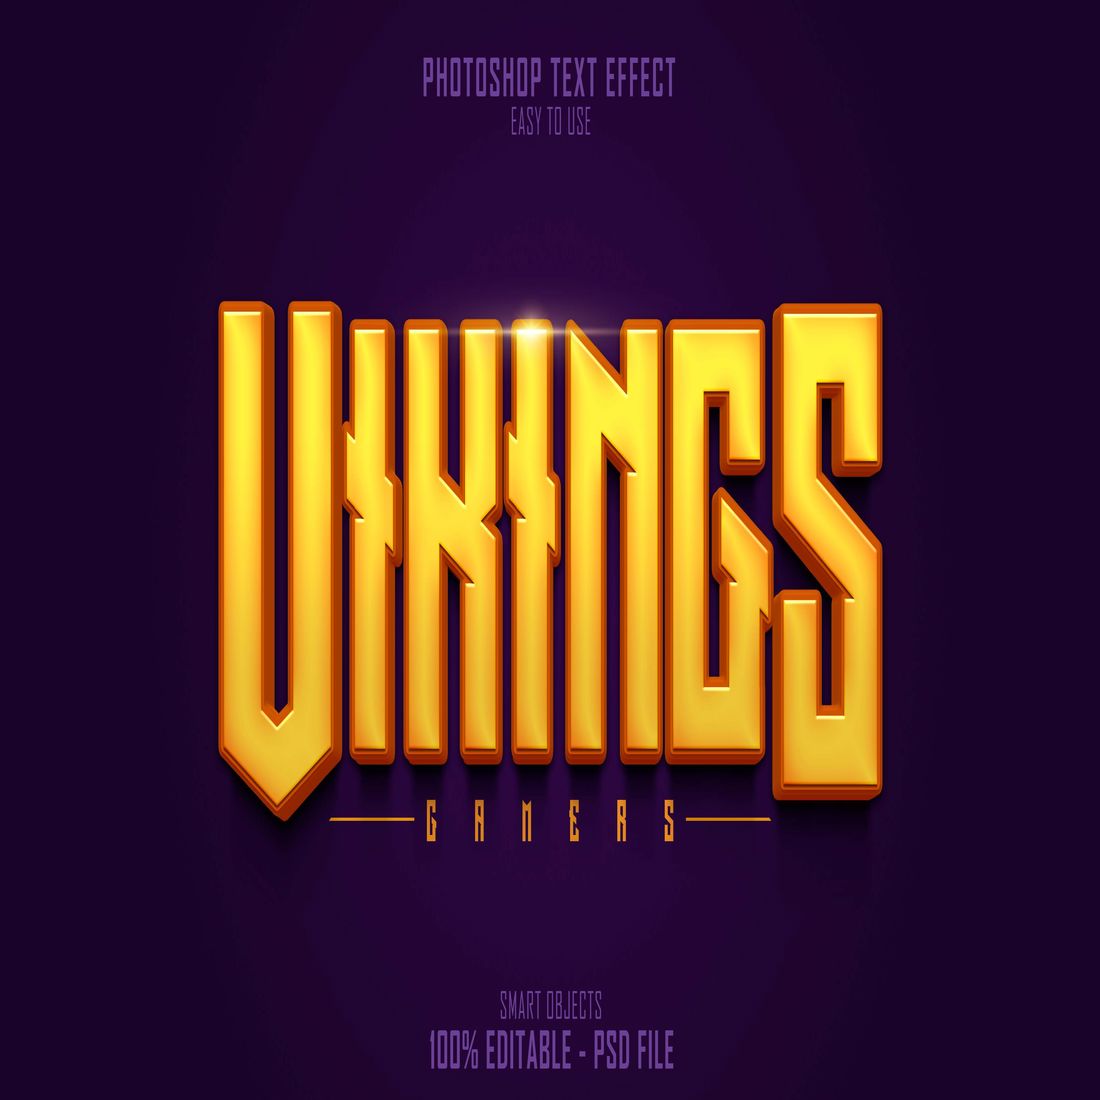 3D - Vikings - Gaming - Fully Editable Text - PSD File preview image.